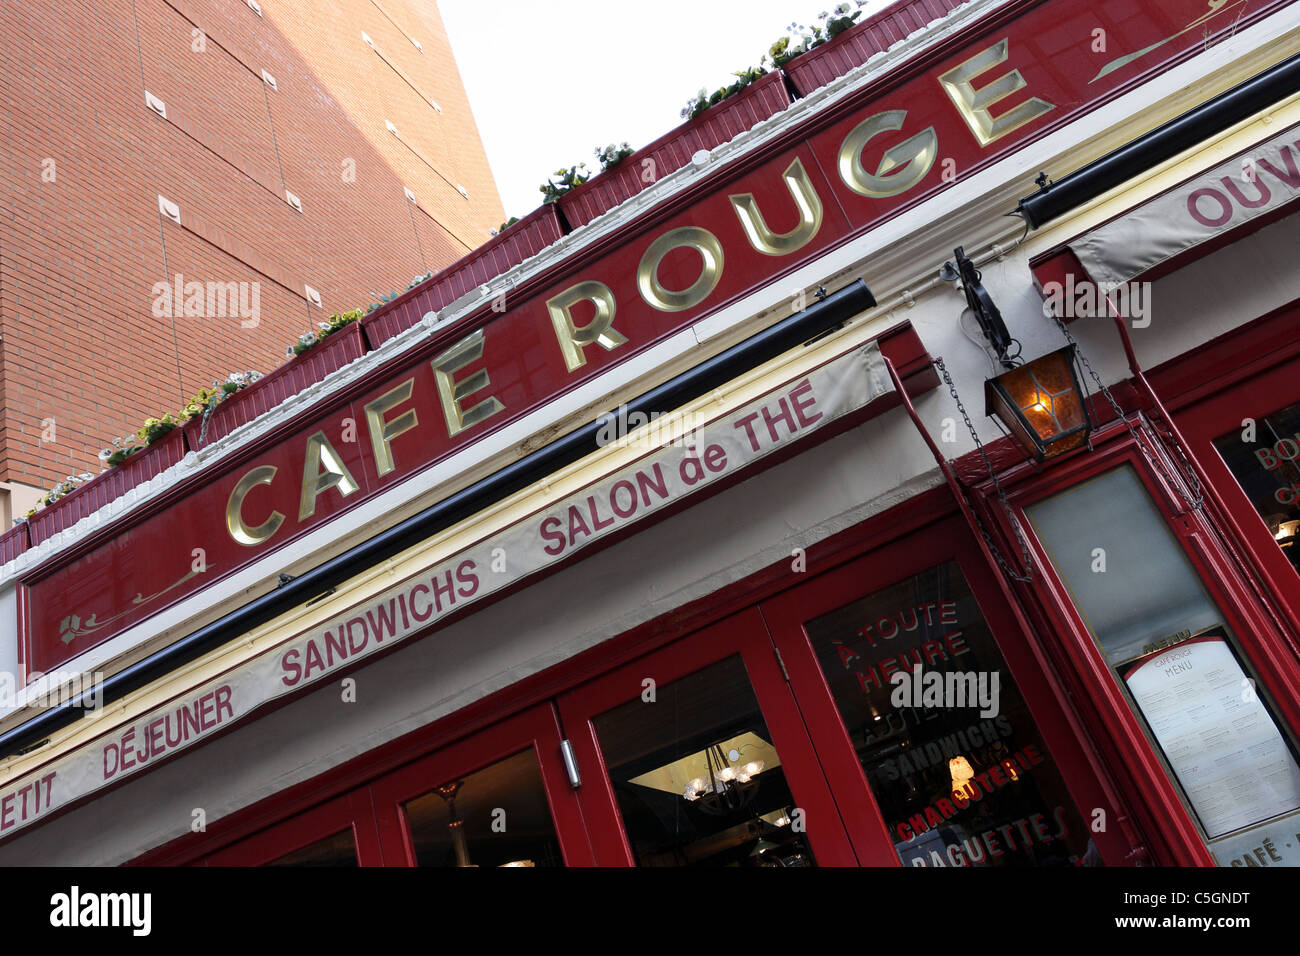 CAFE ROUGE,popular restaurant and cafe situated opposite Harrods department store in Basil Street,Knightsbridge. Stock Photo